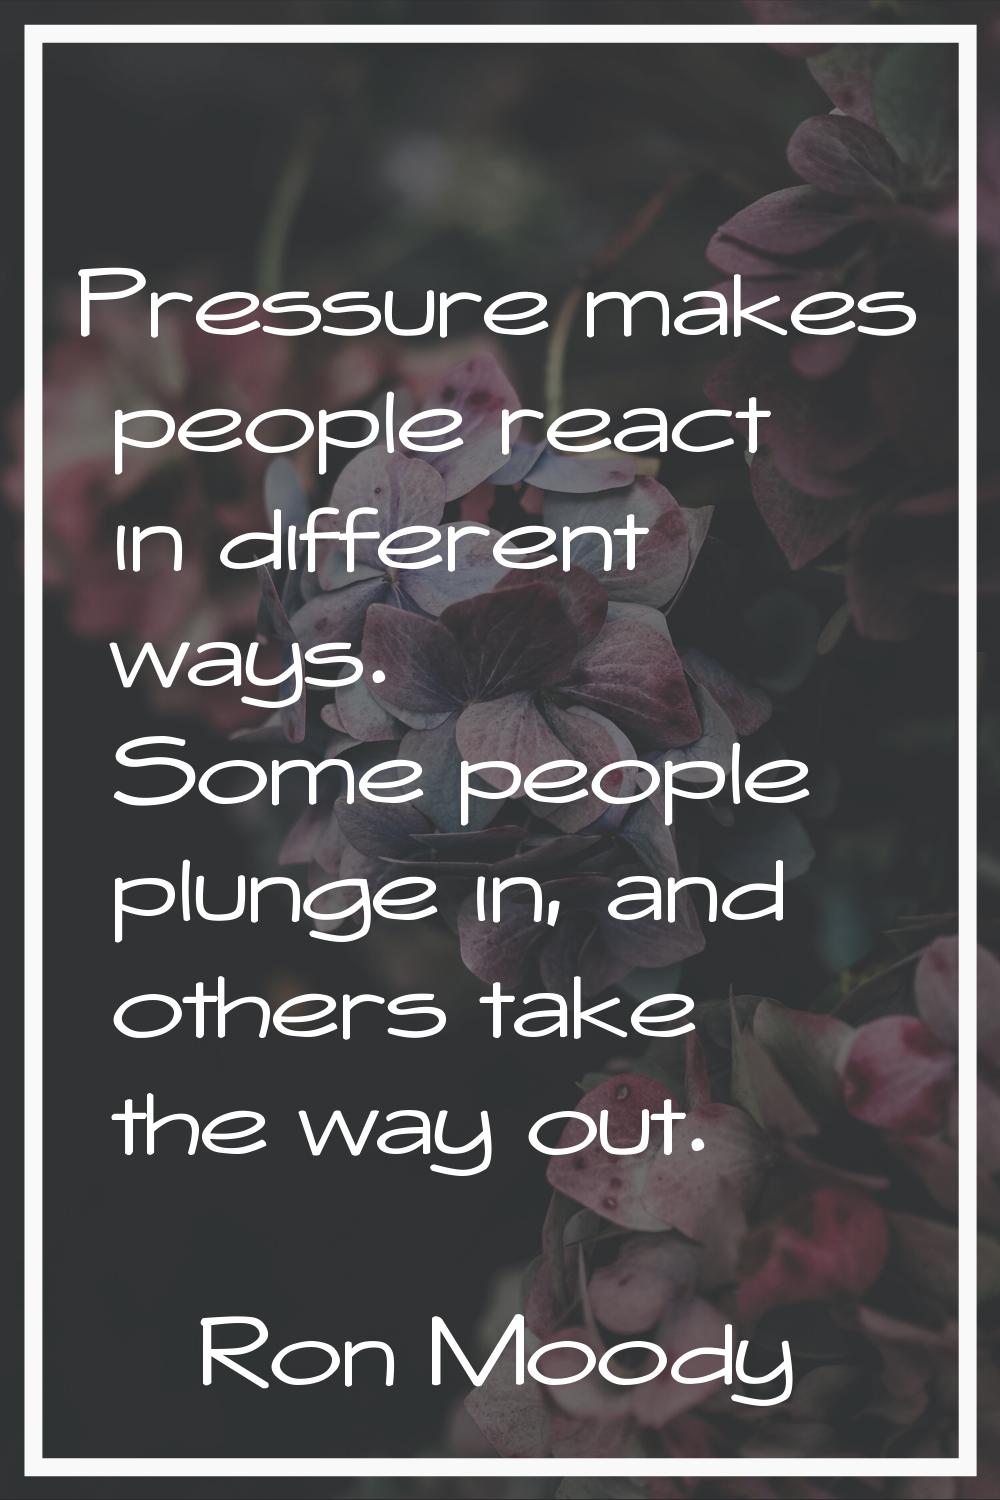 Pressure makes people react in different ways. Some people plunge in, and others take the way out.